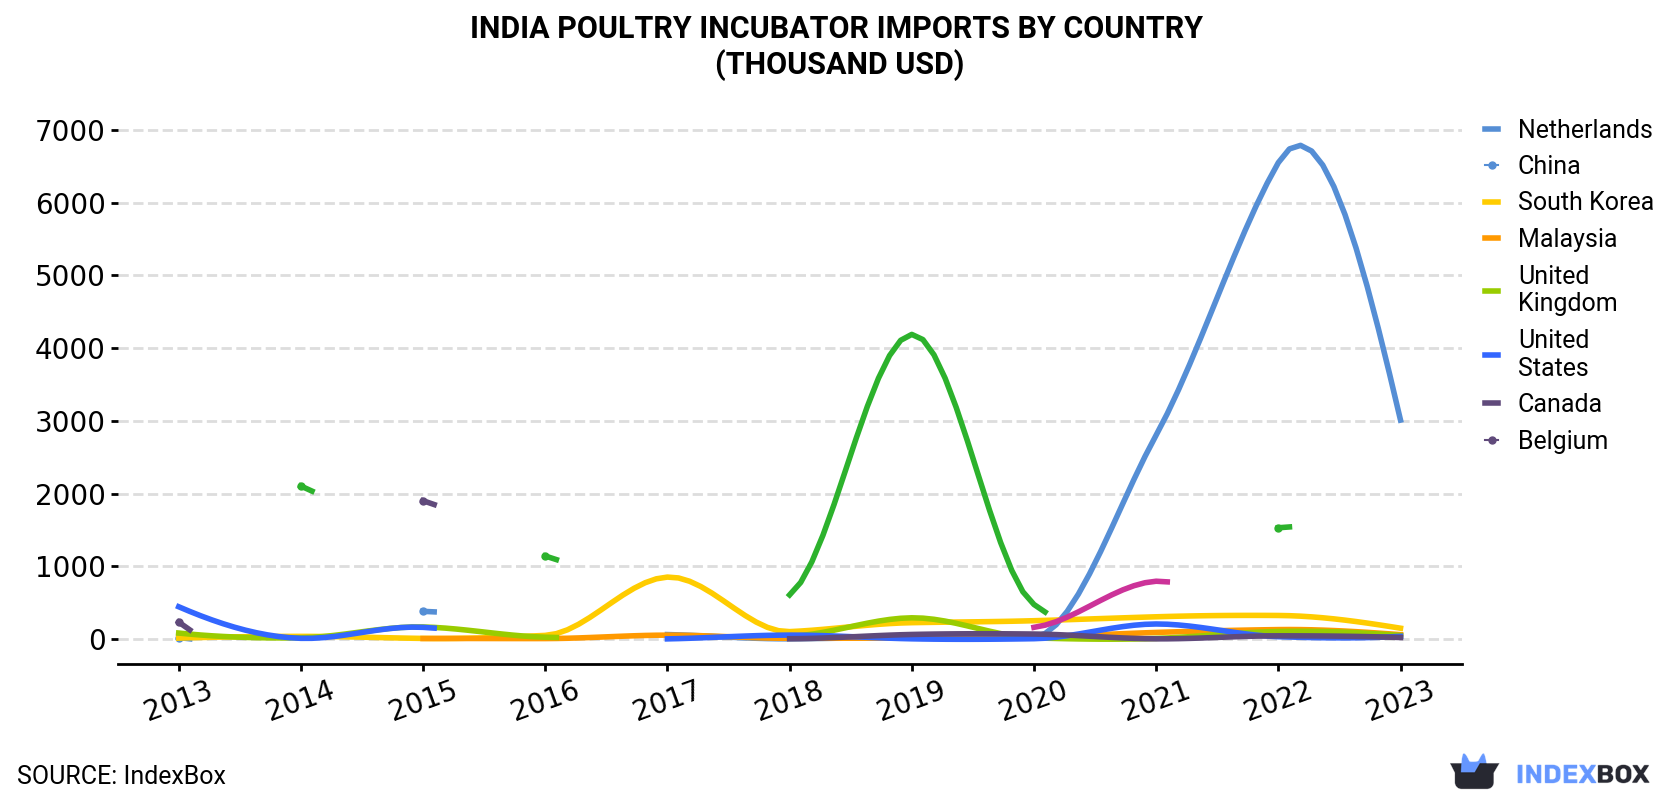 India Poultry Incubator Imports By Country (Thousand USD)